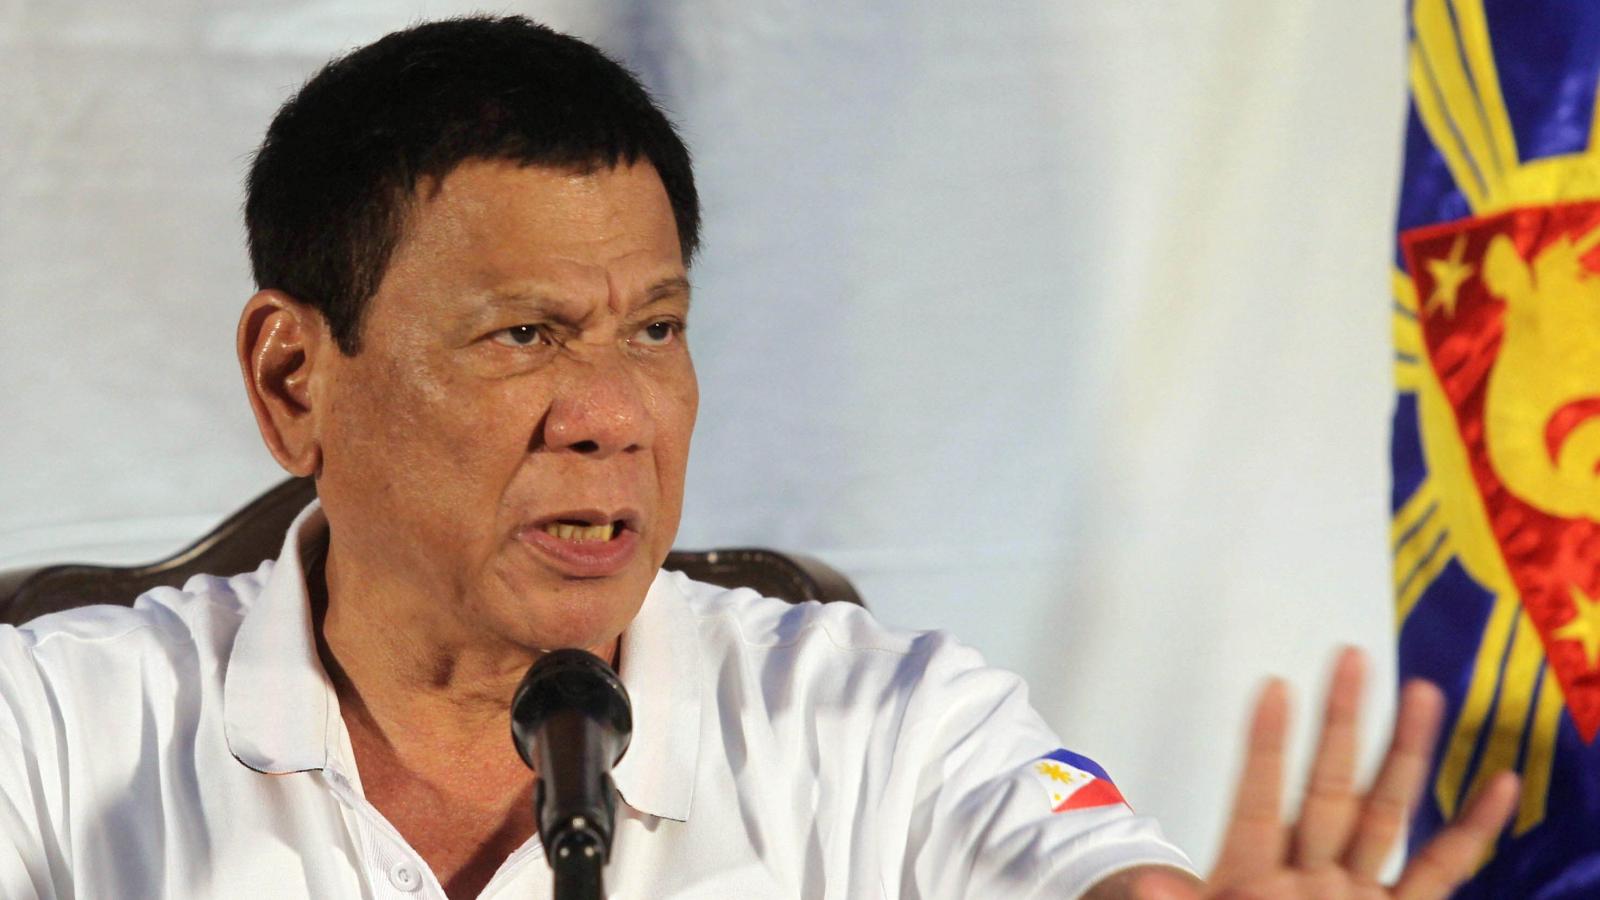 You are a psychopath”: An actress's post on Philippines president